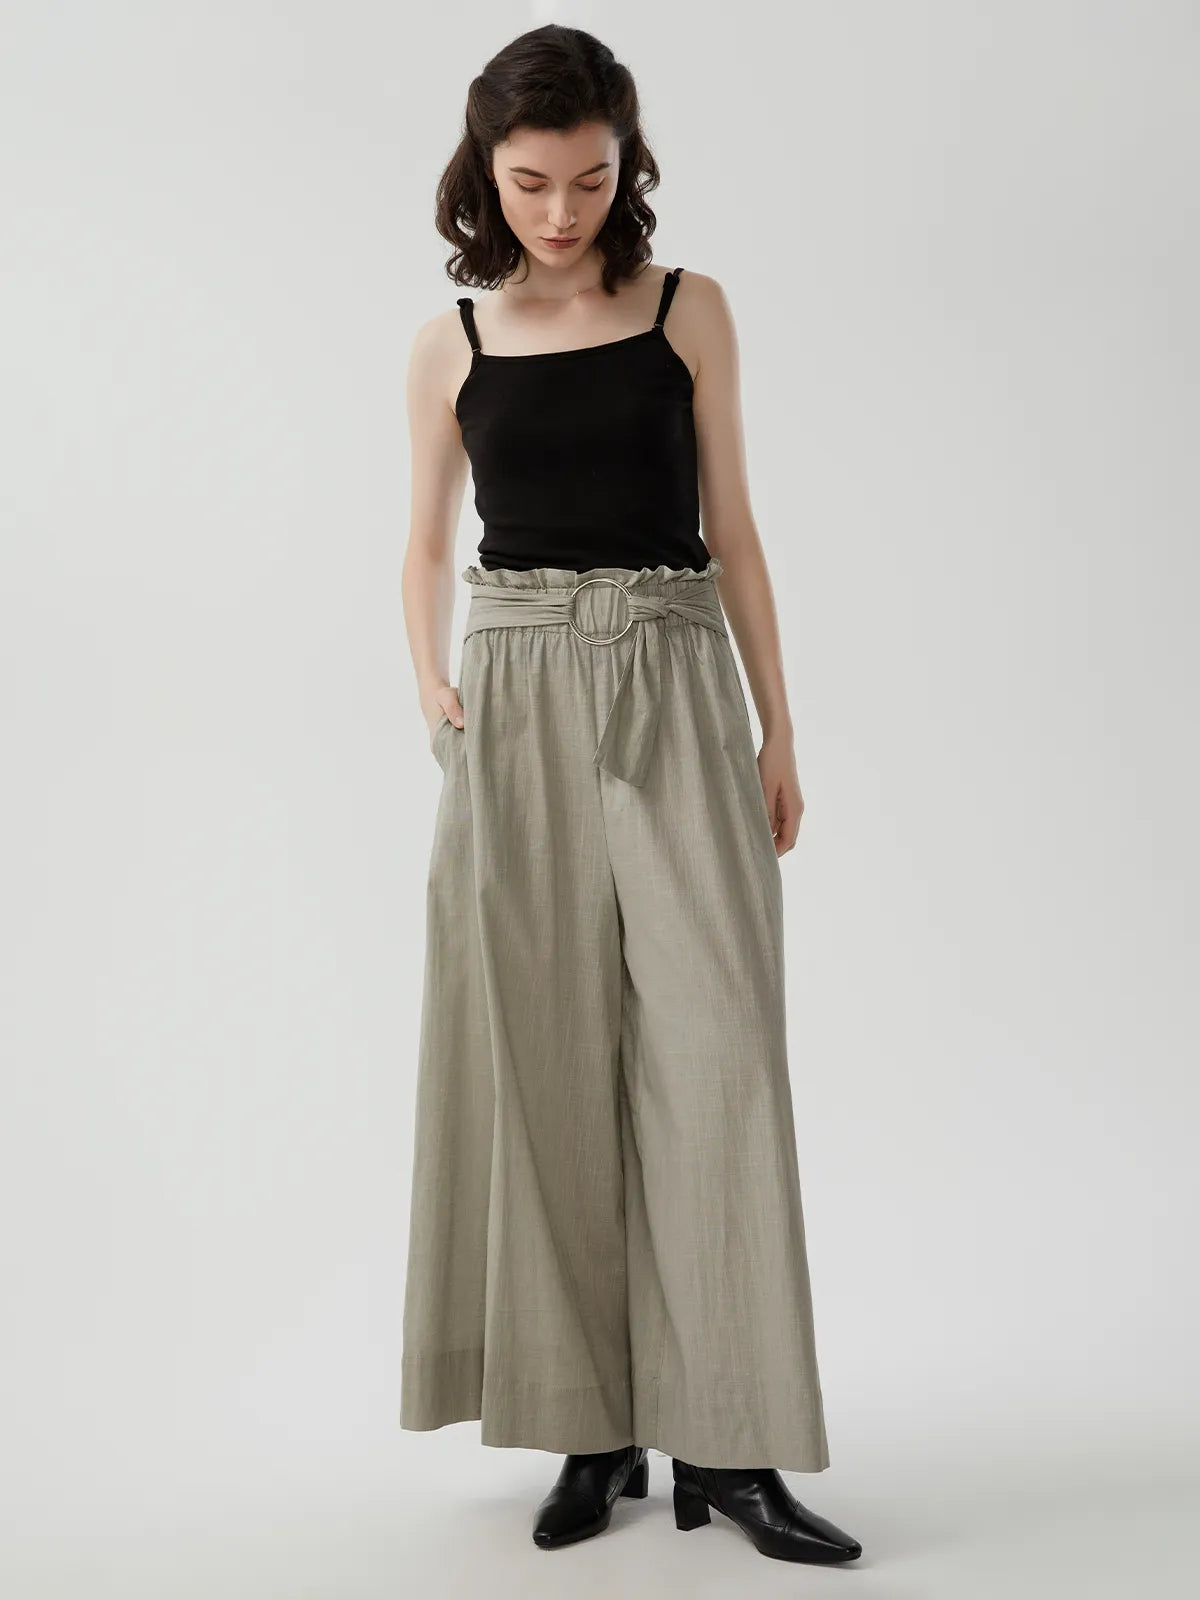 Experience the comfort of lightweight linen in these high-waisted trousers